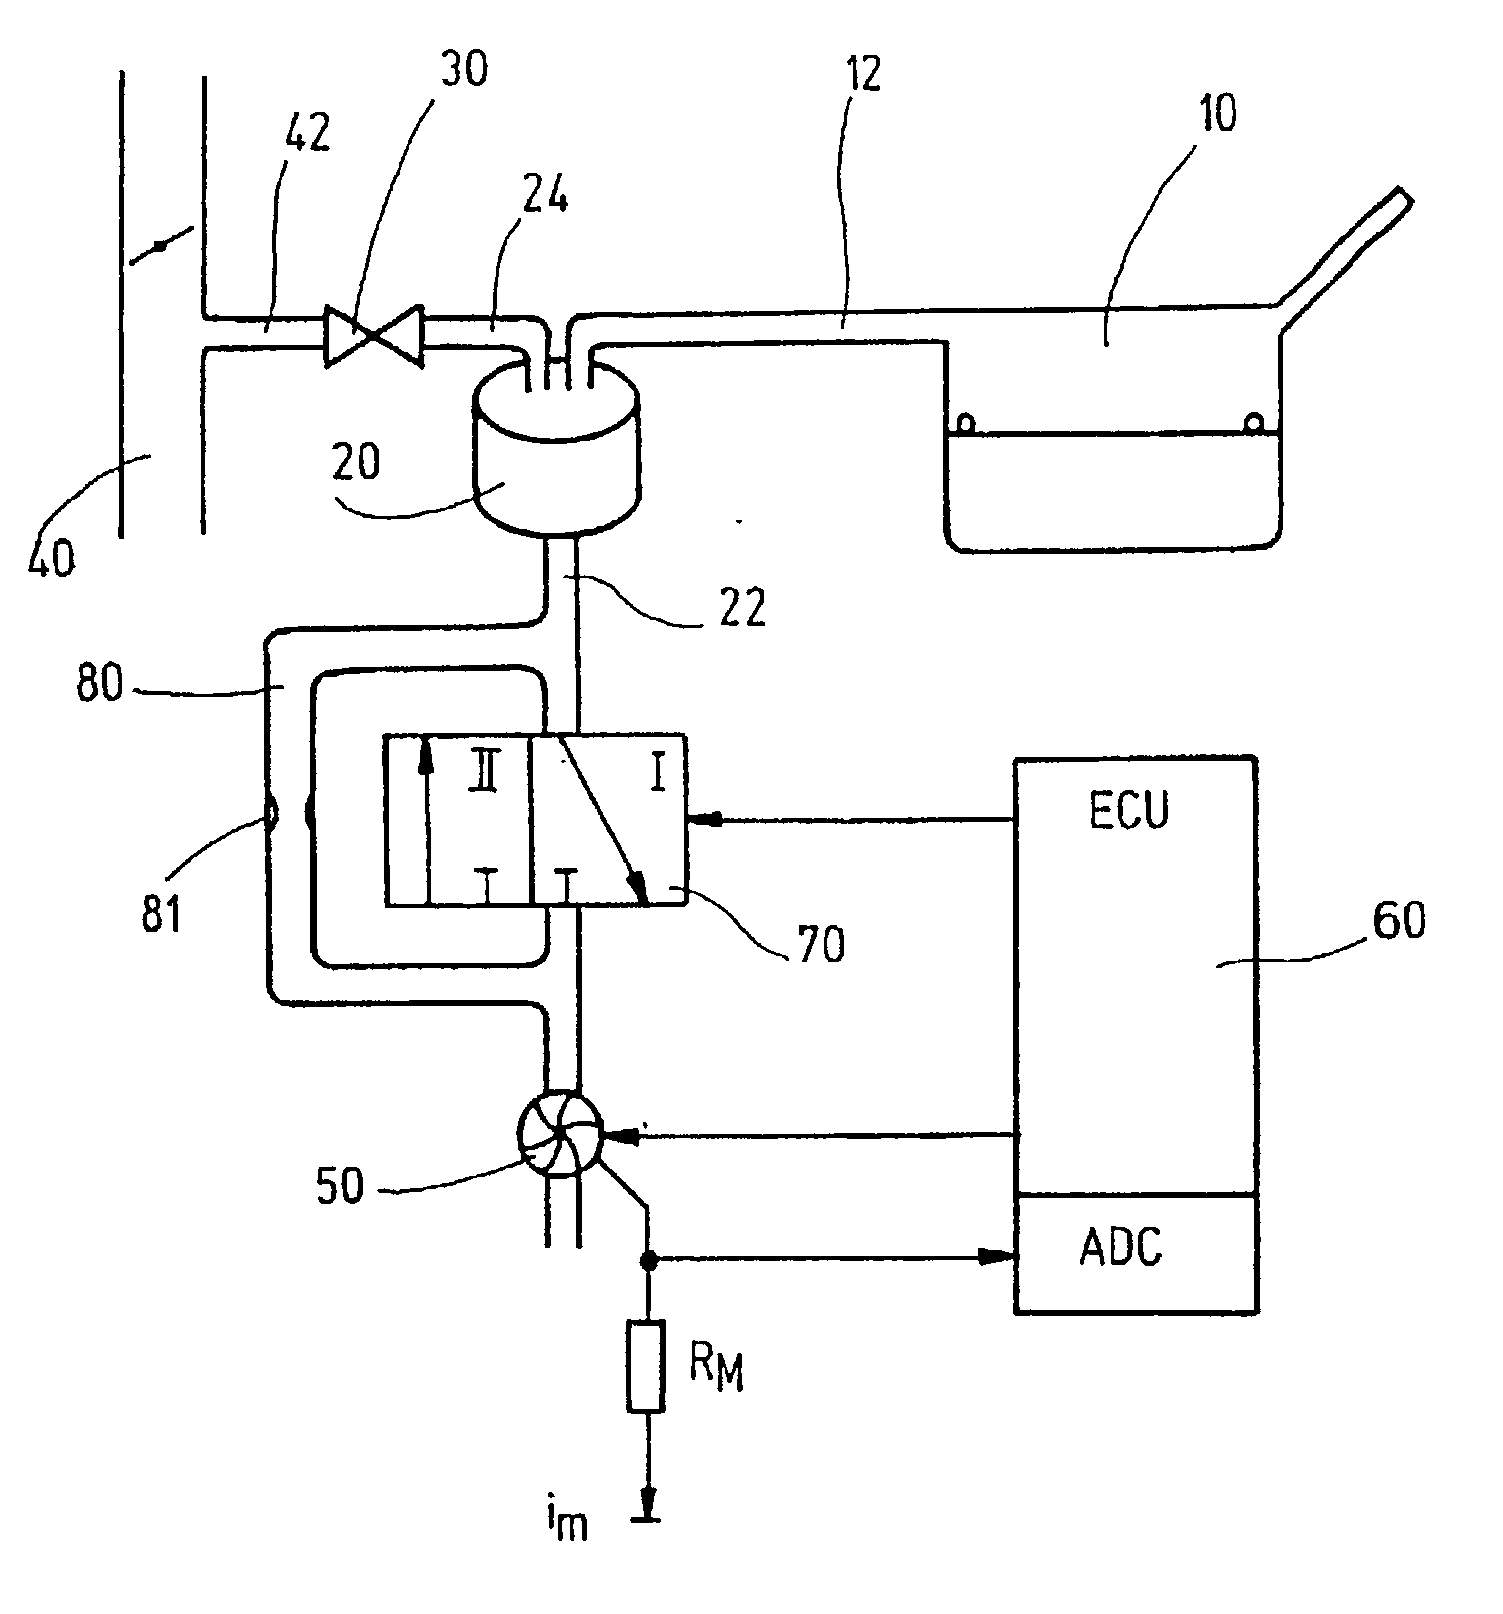 Method for verifying the tightness of a tank system in a motor vehicle